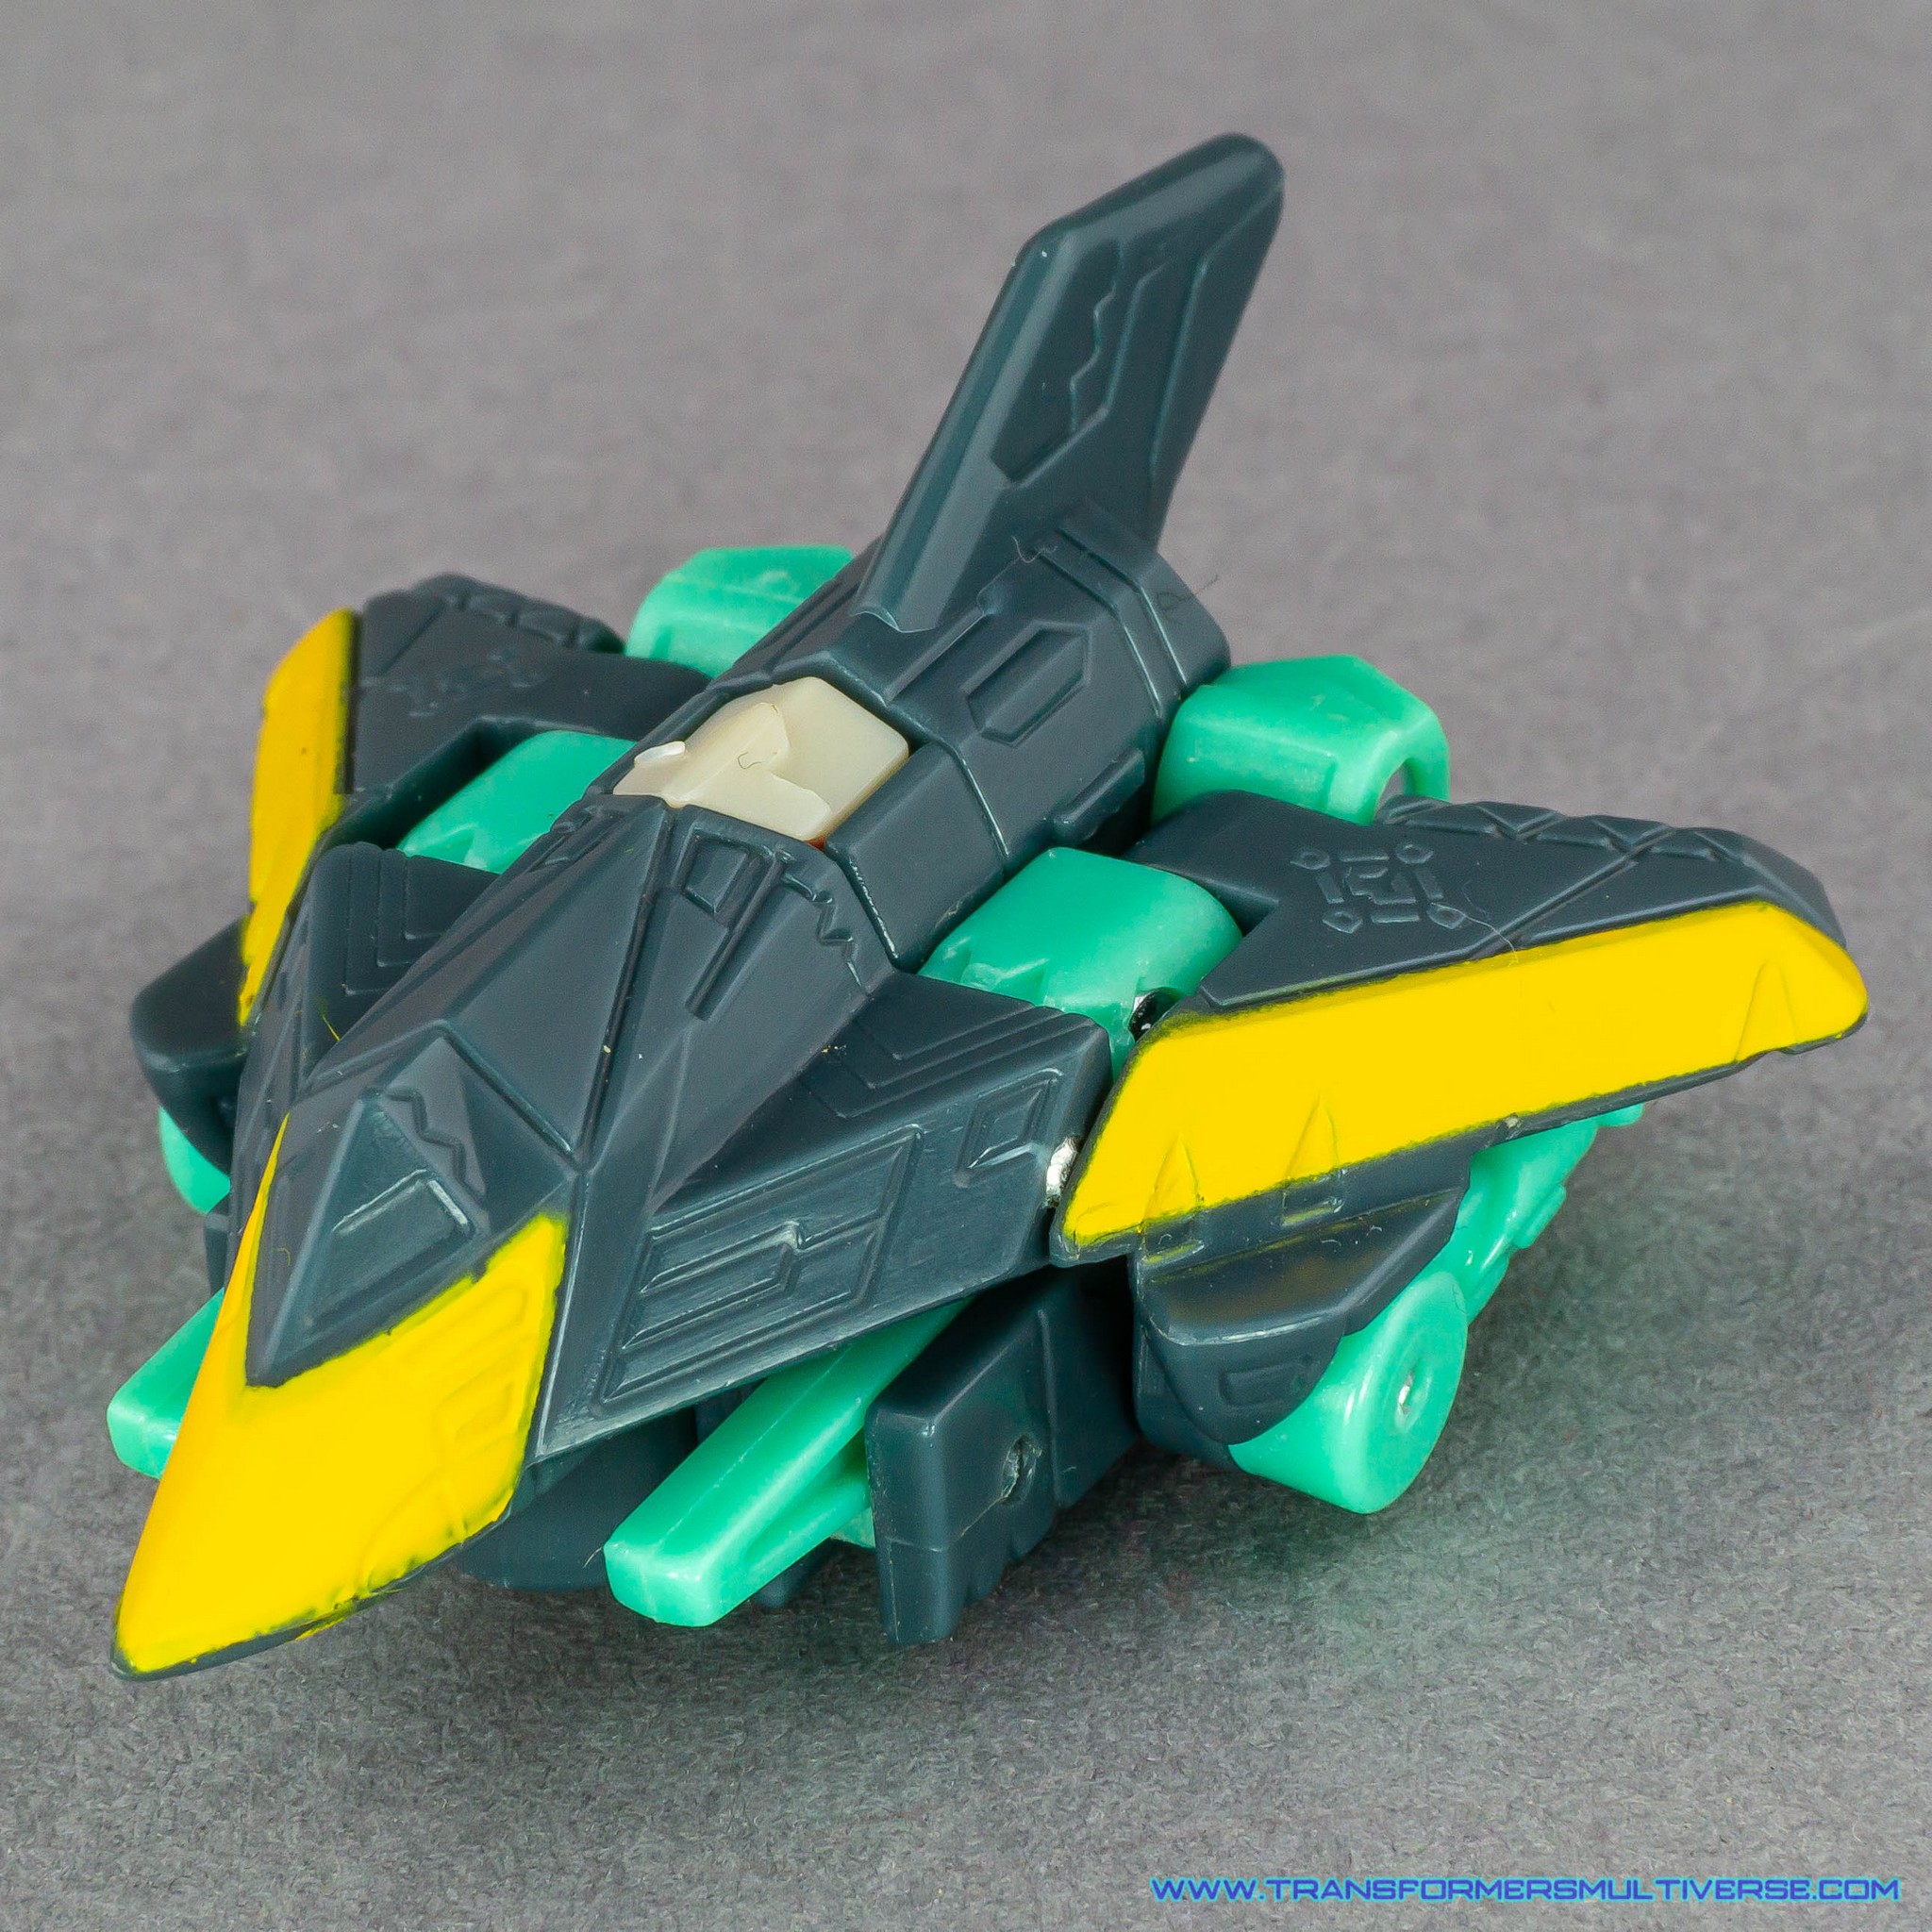 Convention Exclusive Transformers Whisper jet mode